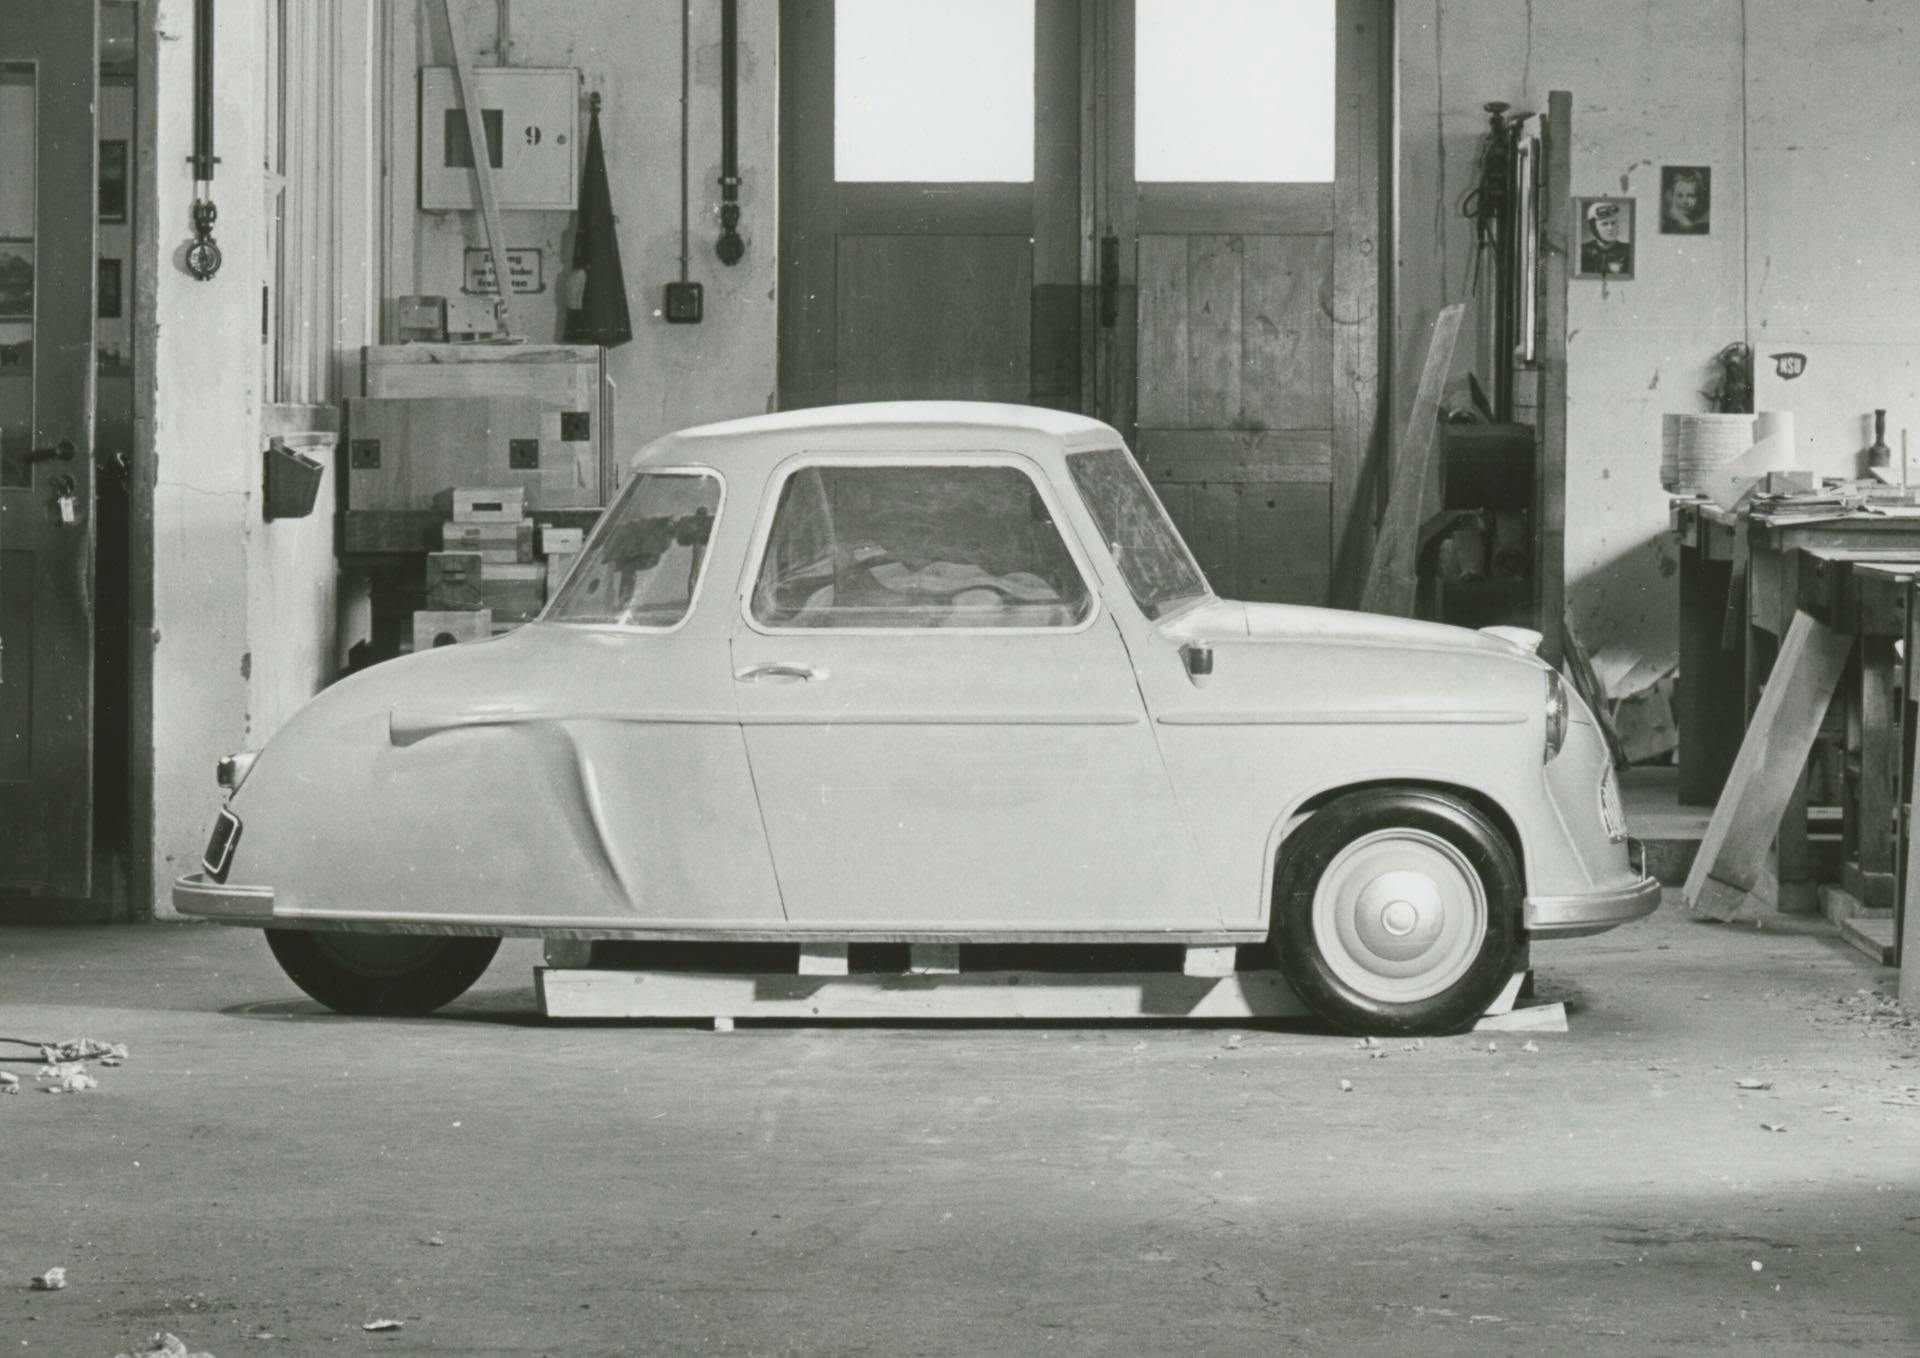 The development department first experimented with a three-wheeler called the Max-Kabine